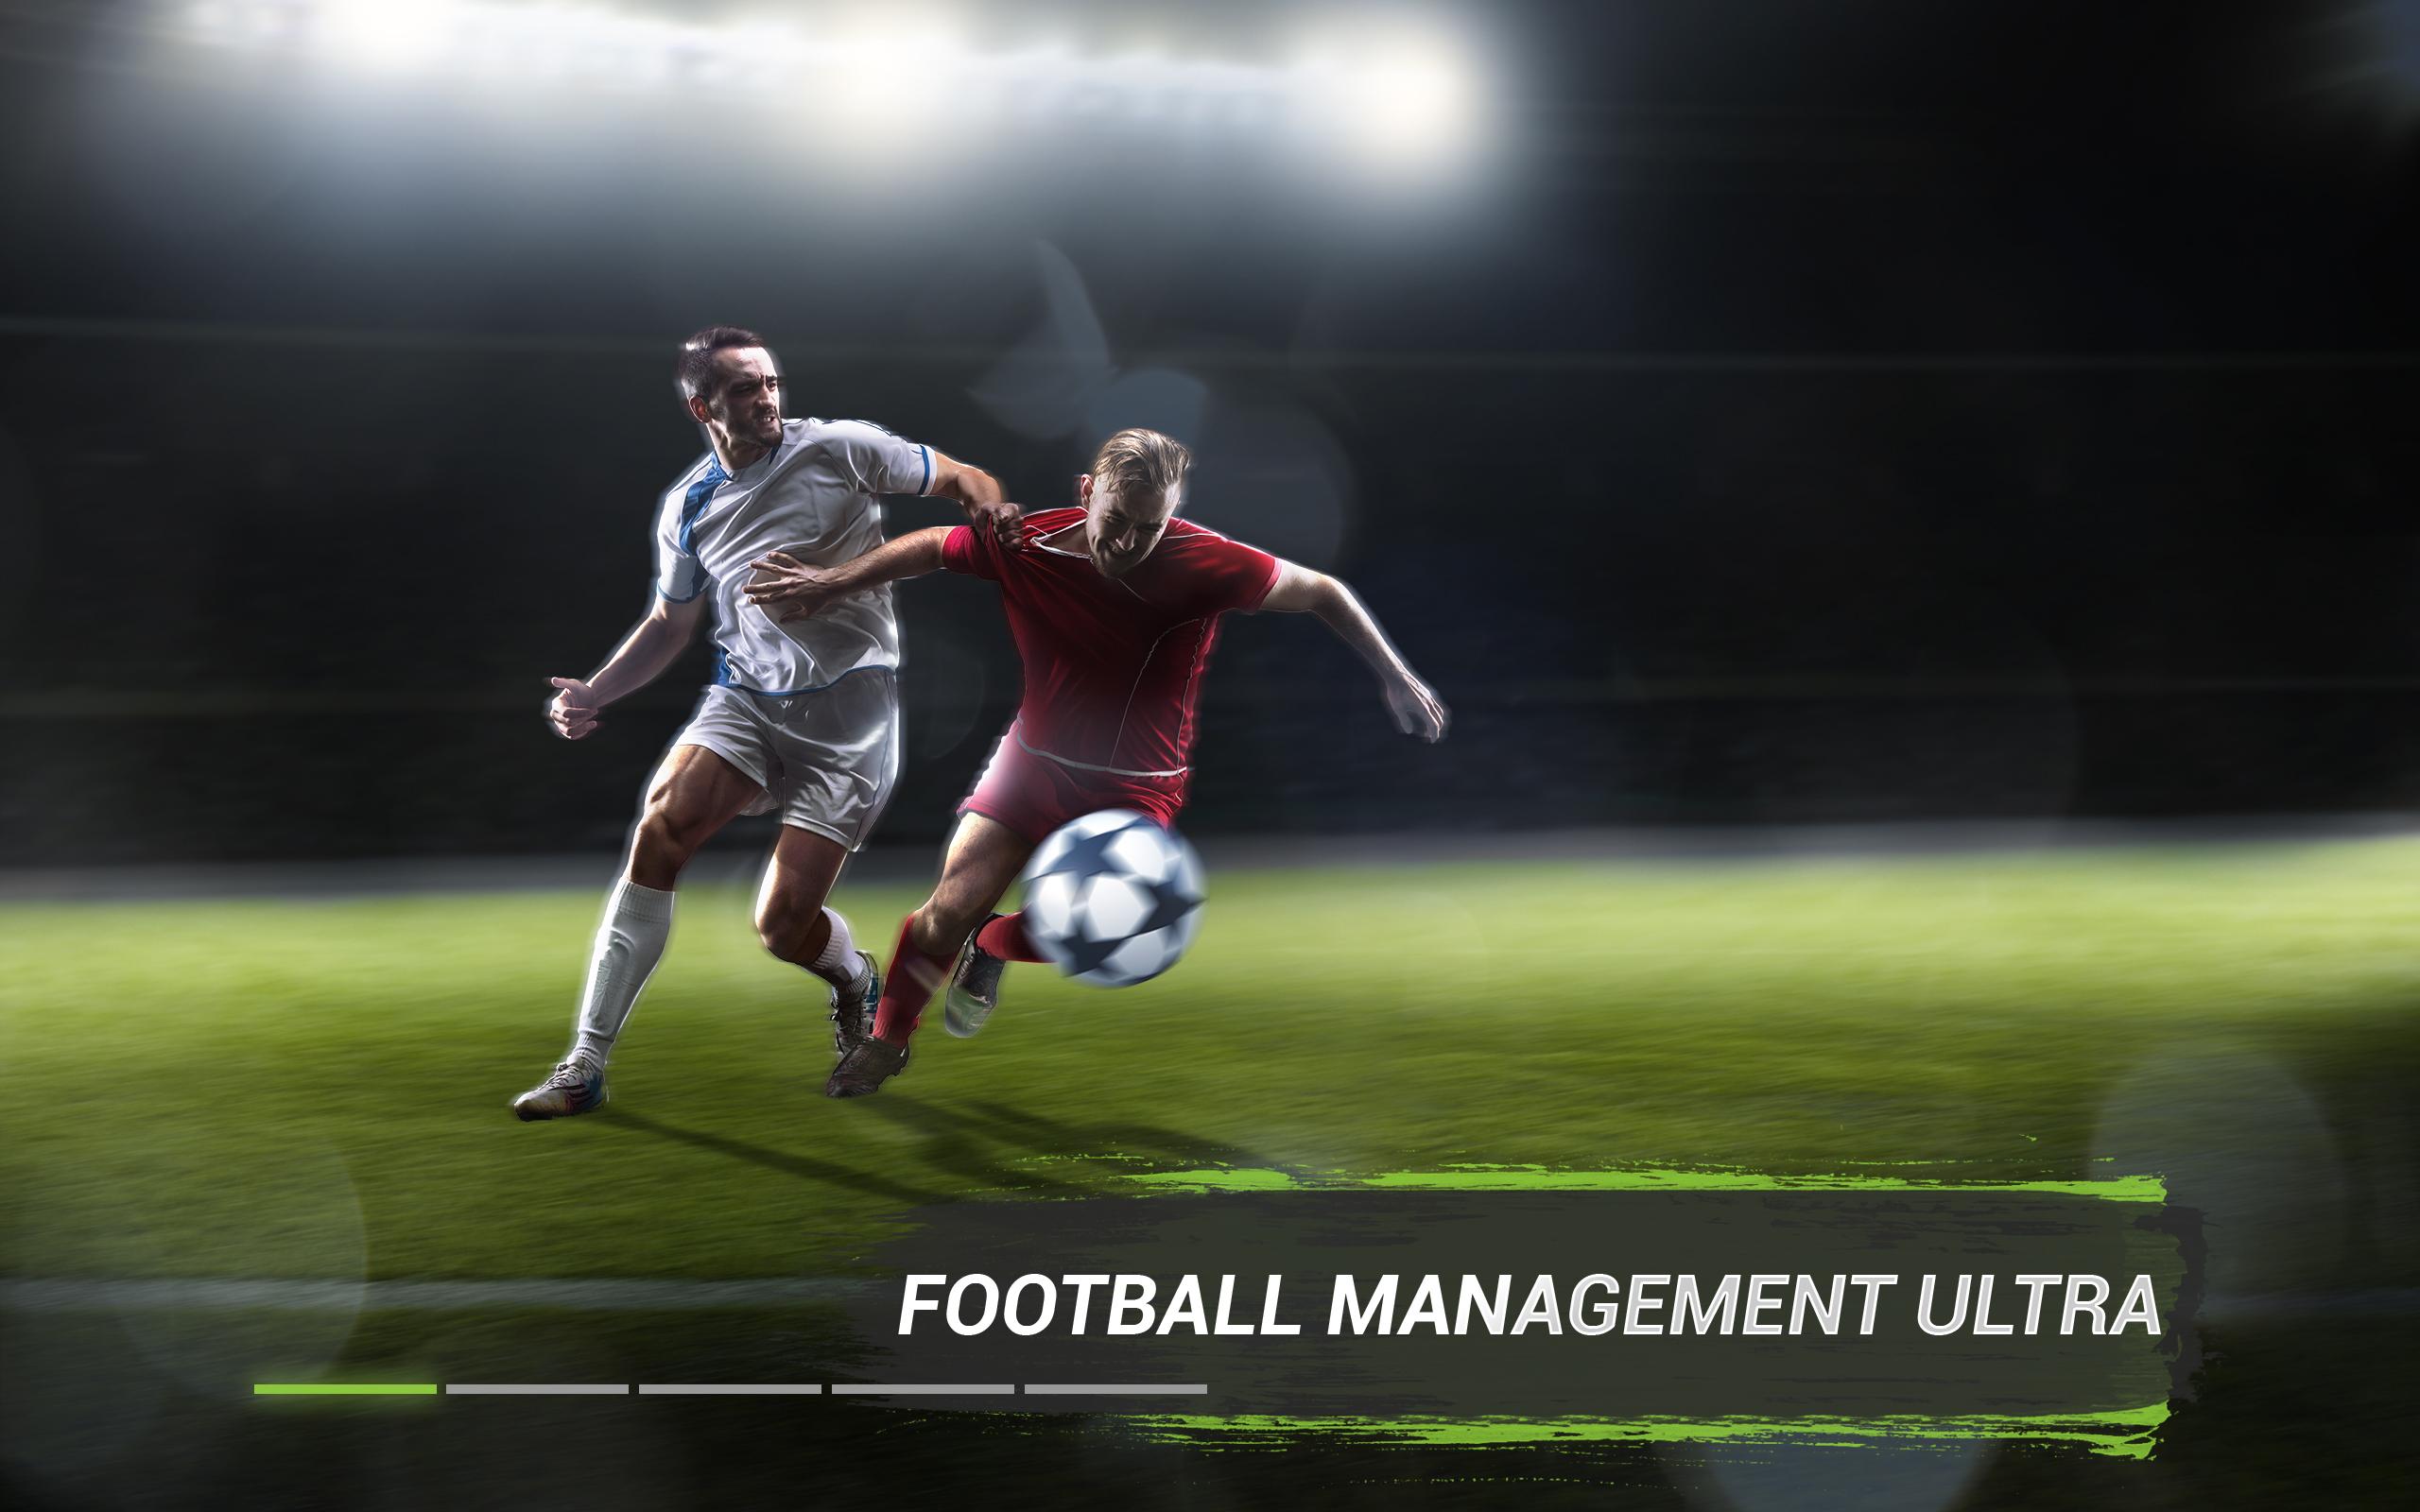 Football managers games. Игра Football Manager 2023. Mamoball на ПК. Football Manager 2018. Soccer Academy.